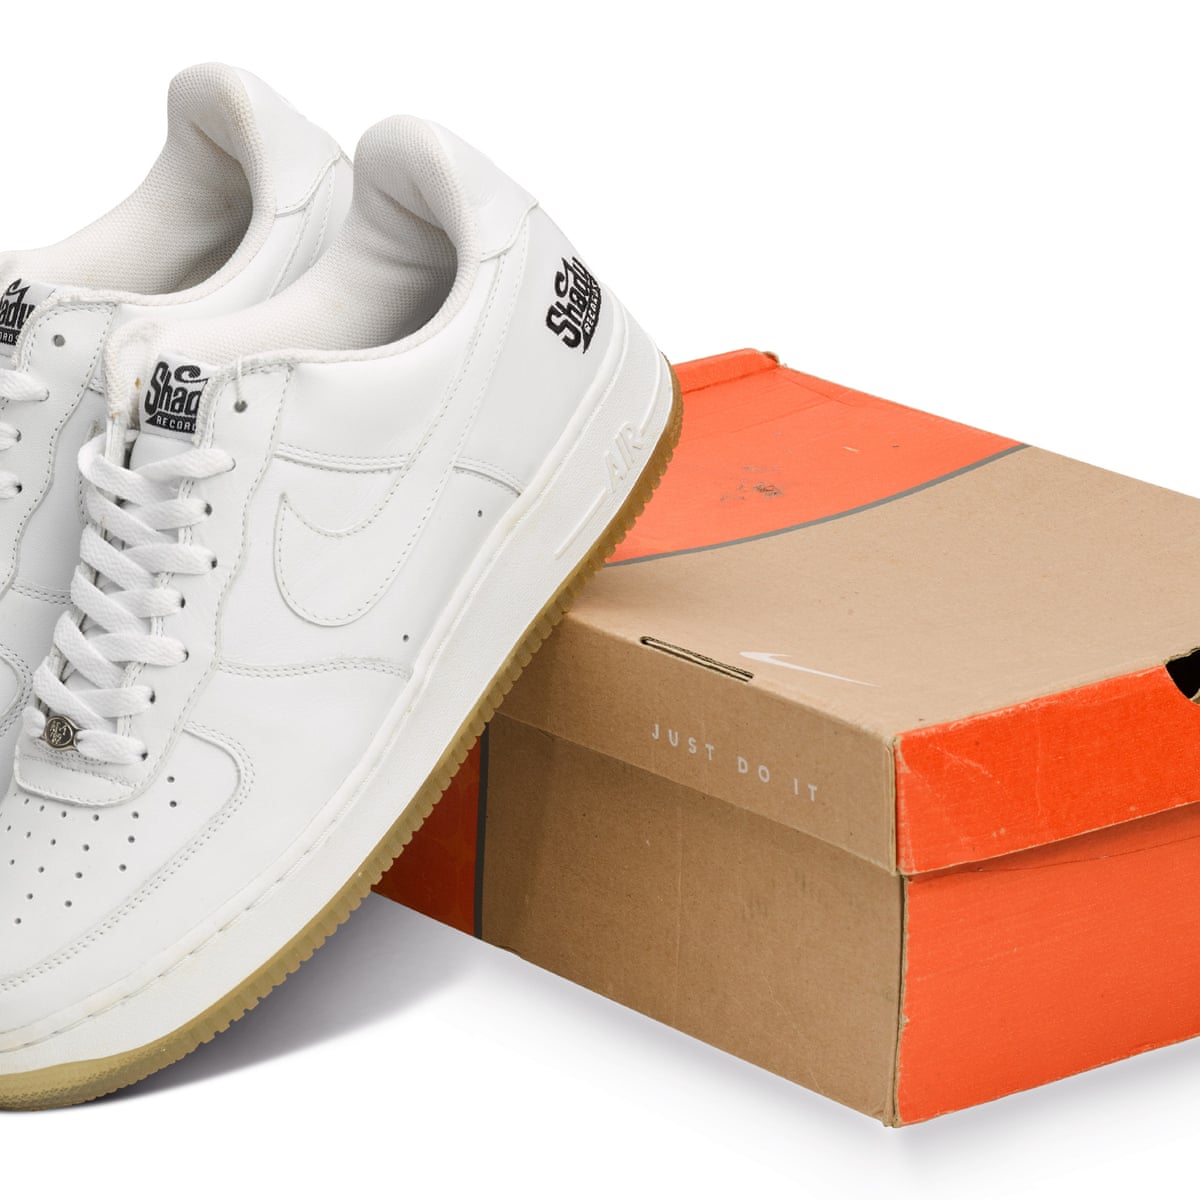 Nike Air Force 1 Special Edition: The Rare And Limited Sneaker Everyone ...